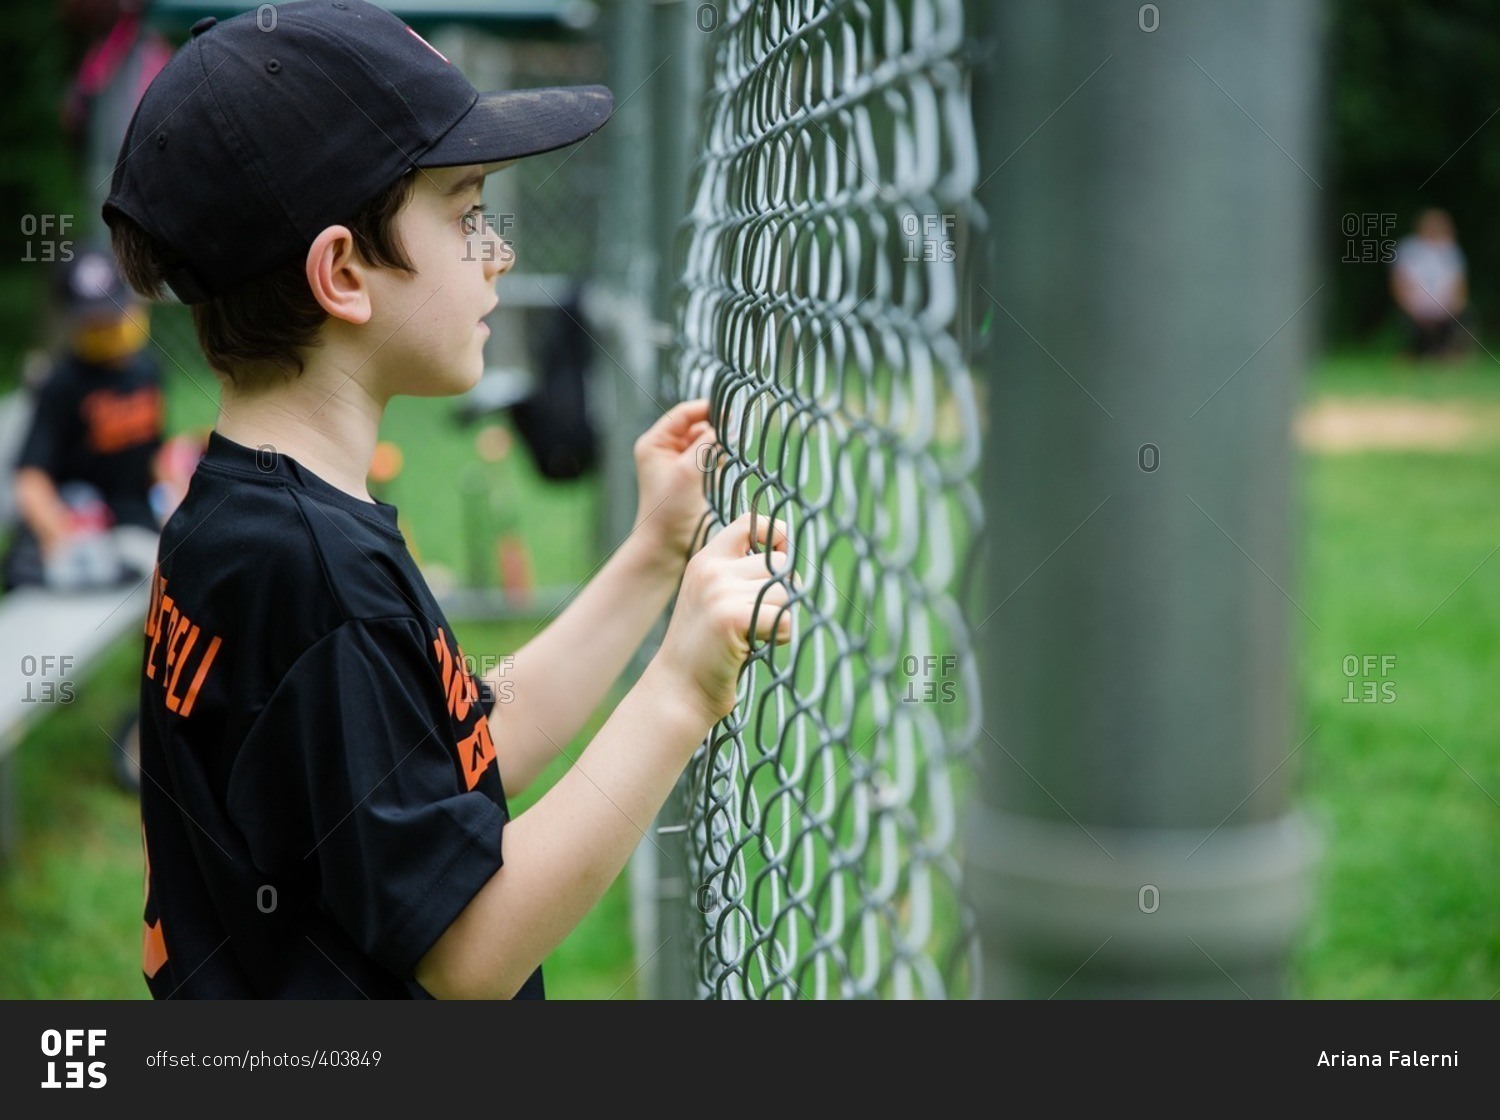 Boy holding onto chain-link fence watching baseball game